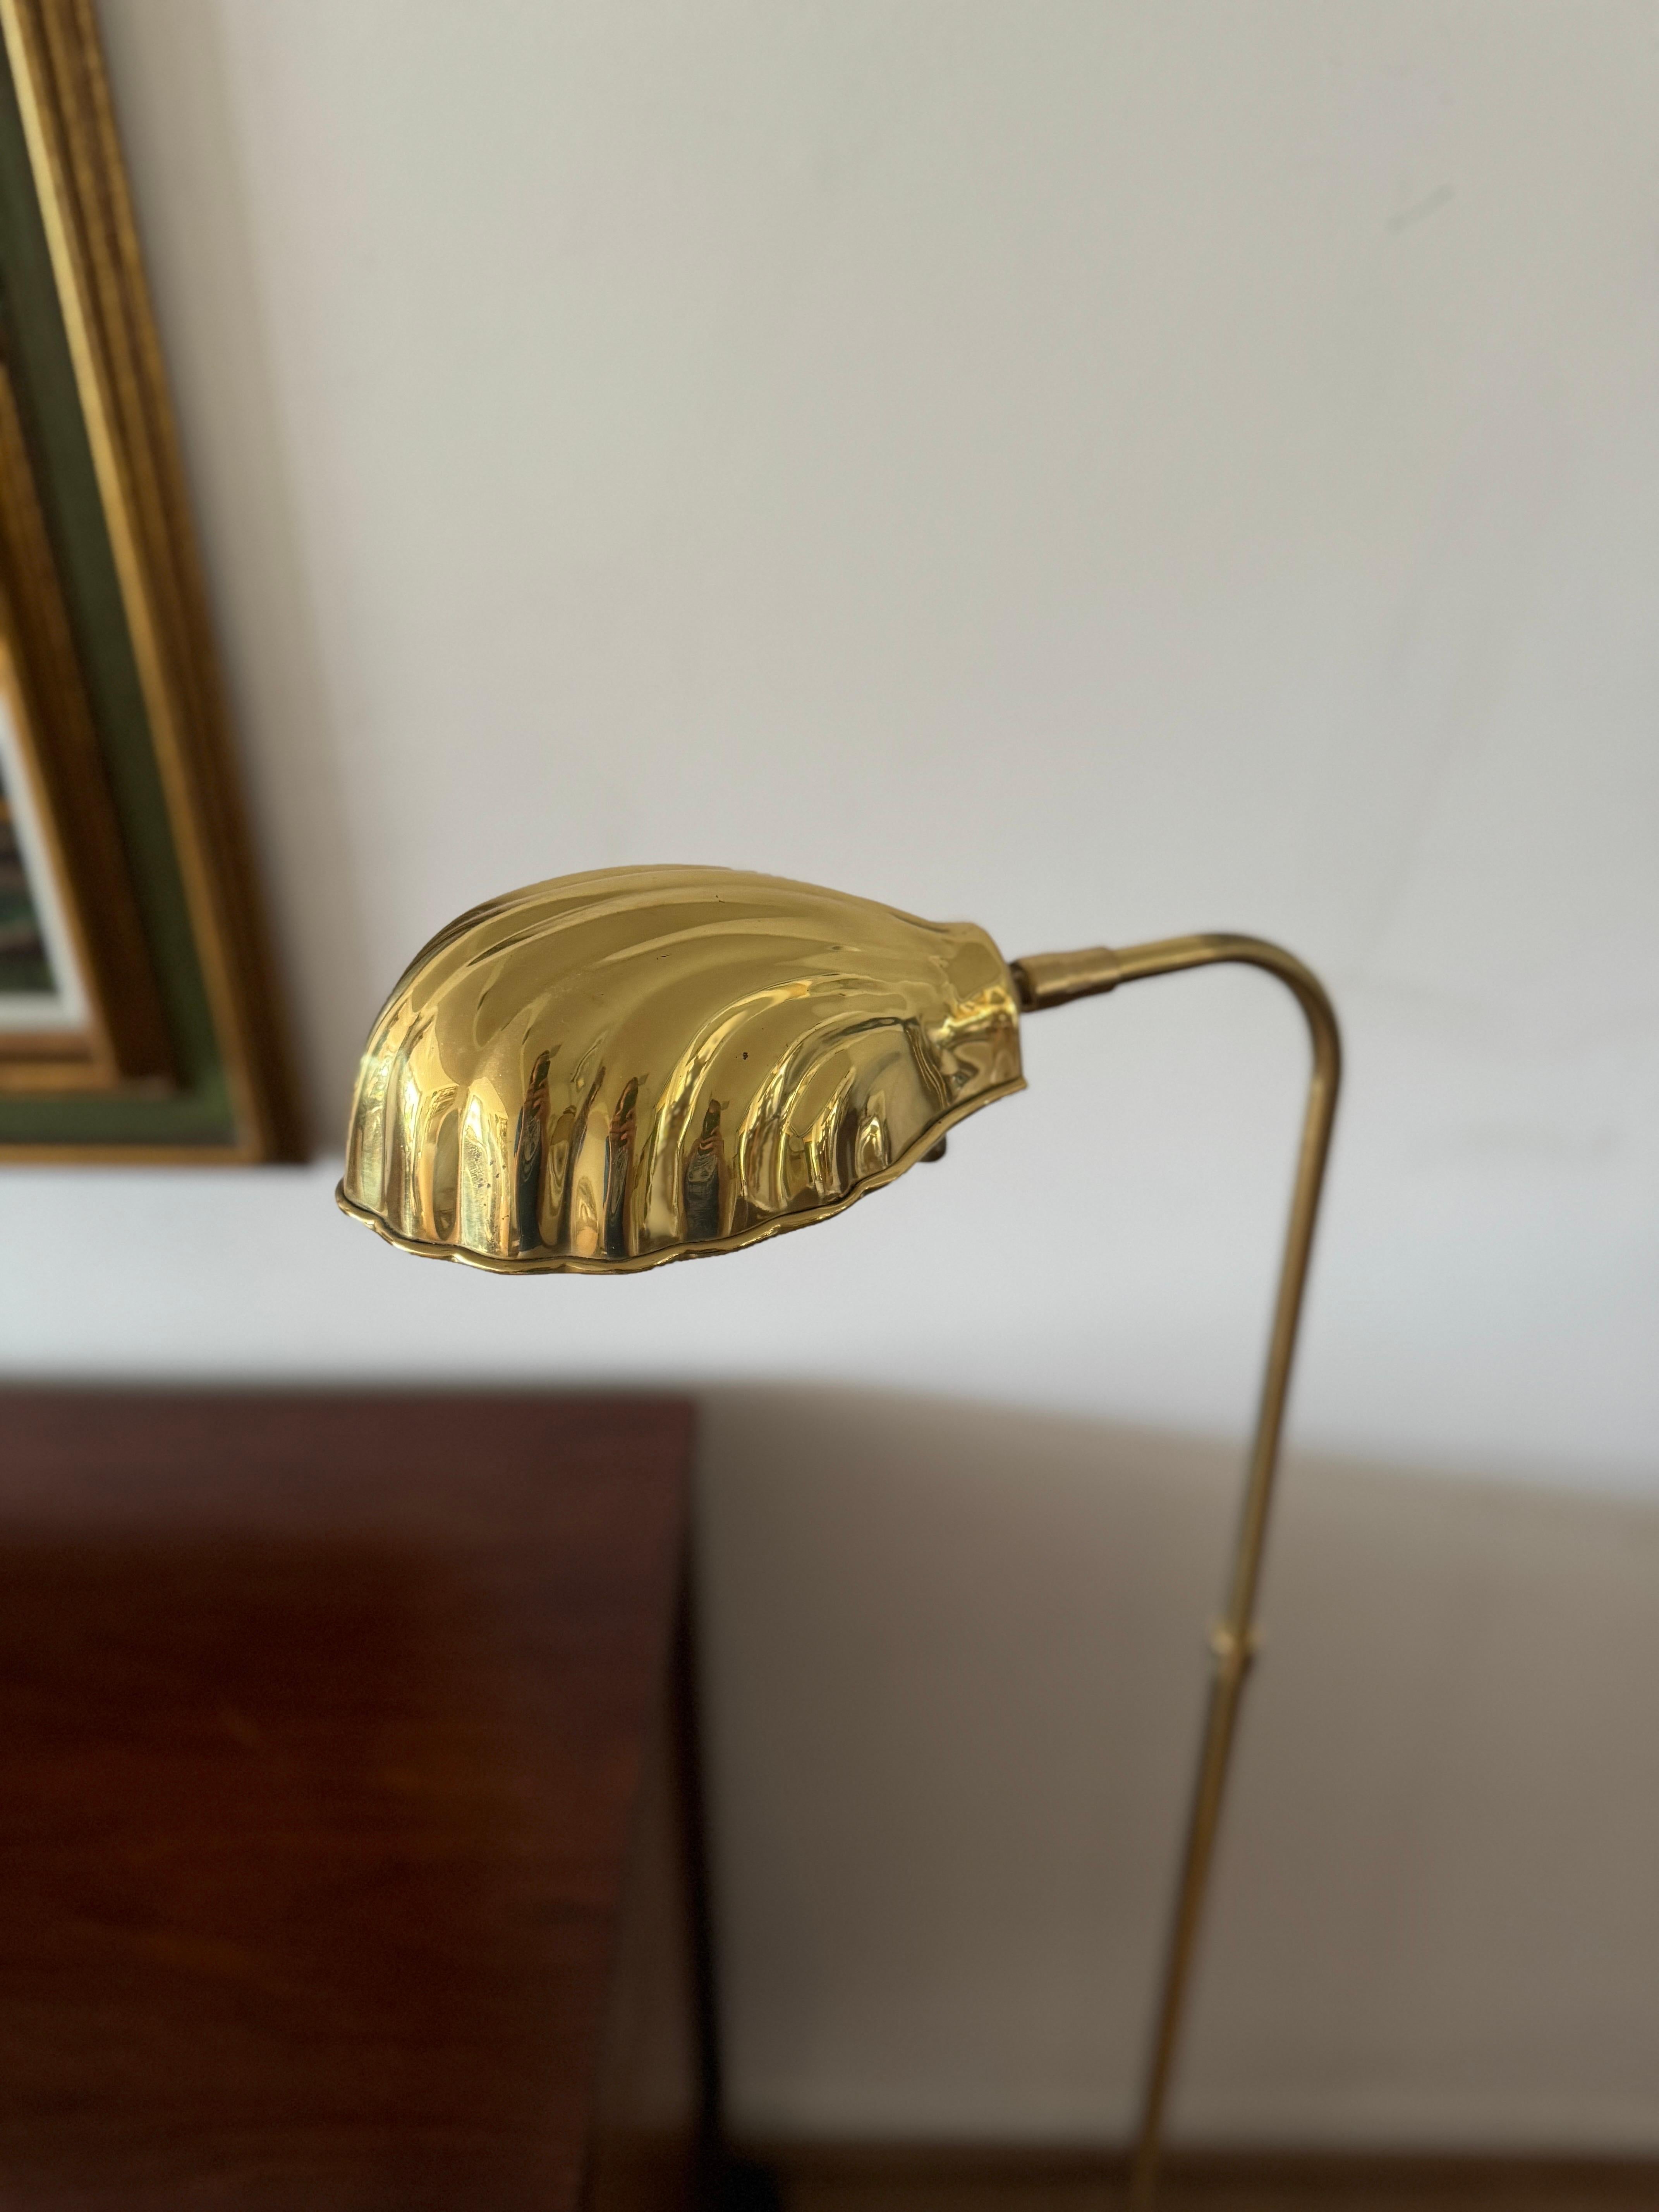 American Vintage Brass Clam Shaped Floor Reading Lamp For Sale